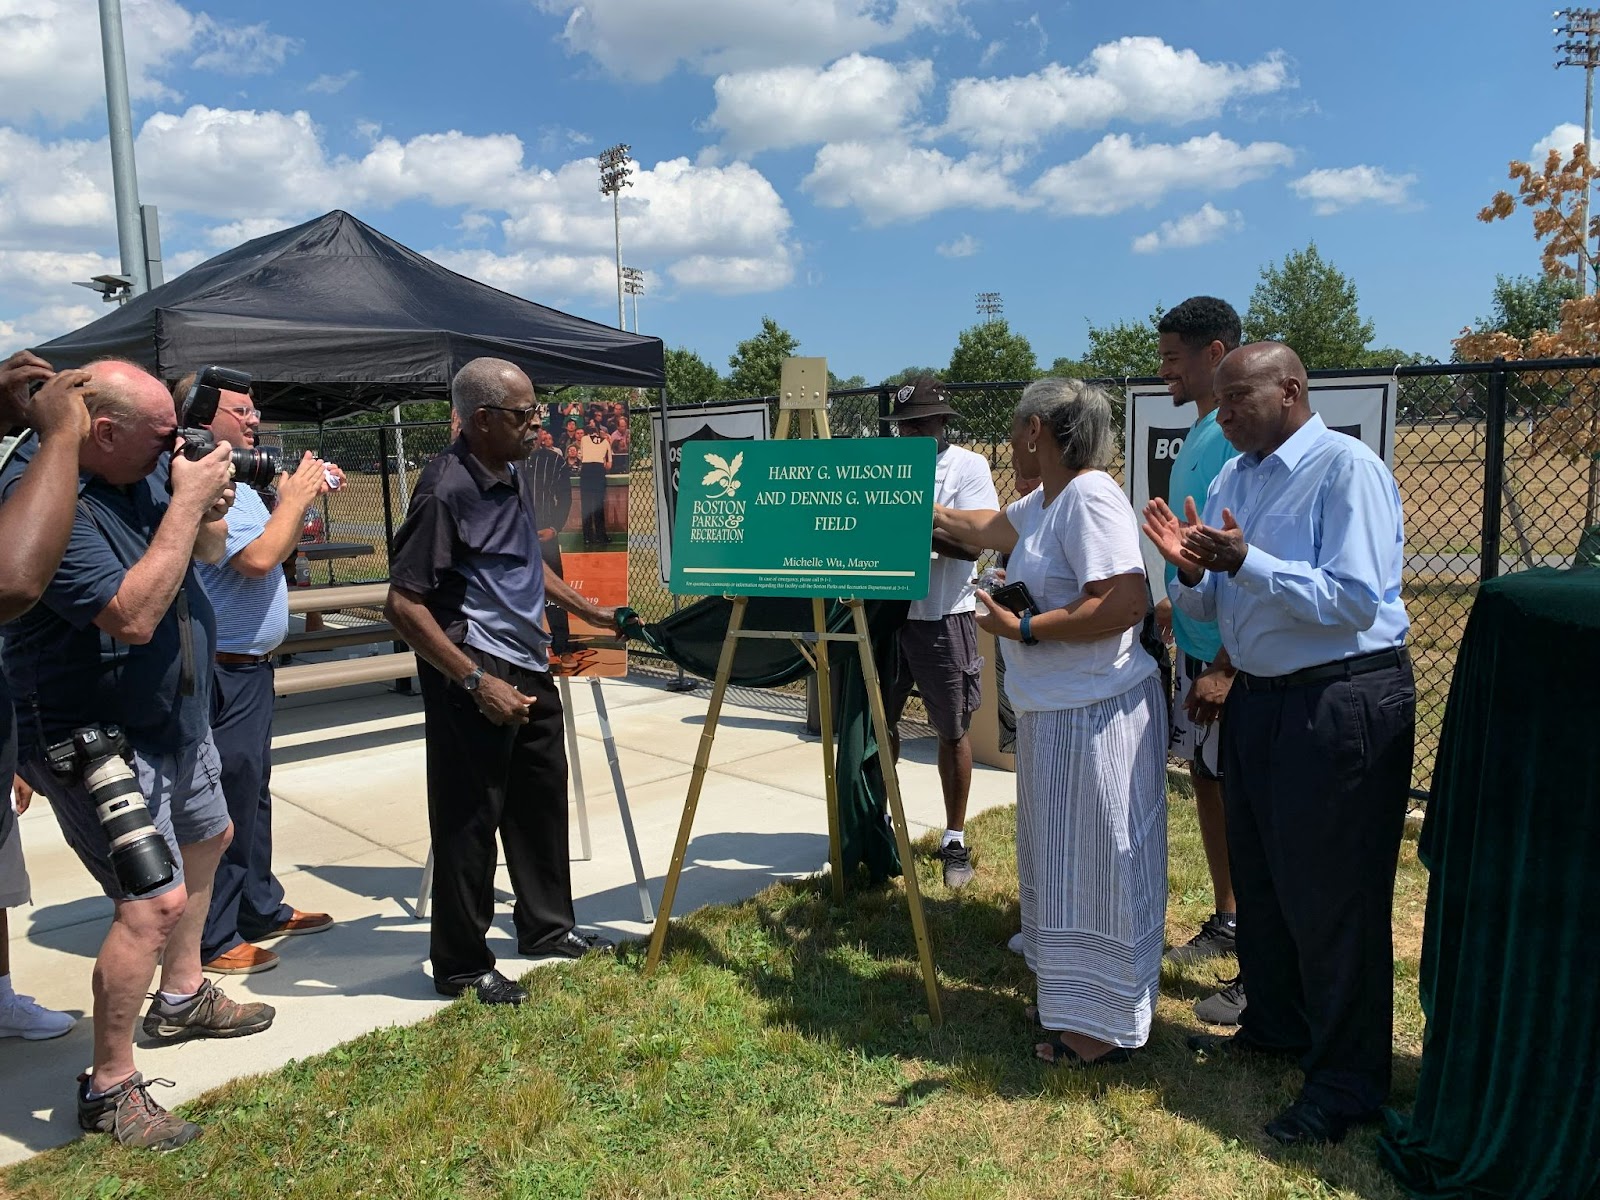 The football field at Harambee Park was dedicated in honor of Harry G. Wilson III and Dennis G. Wilson.